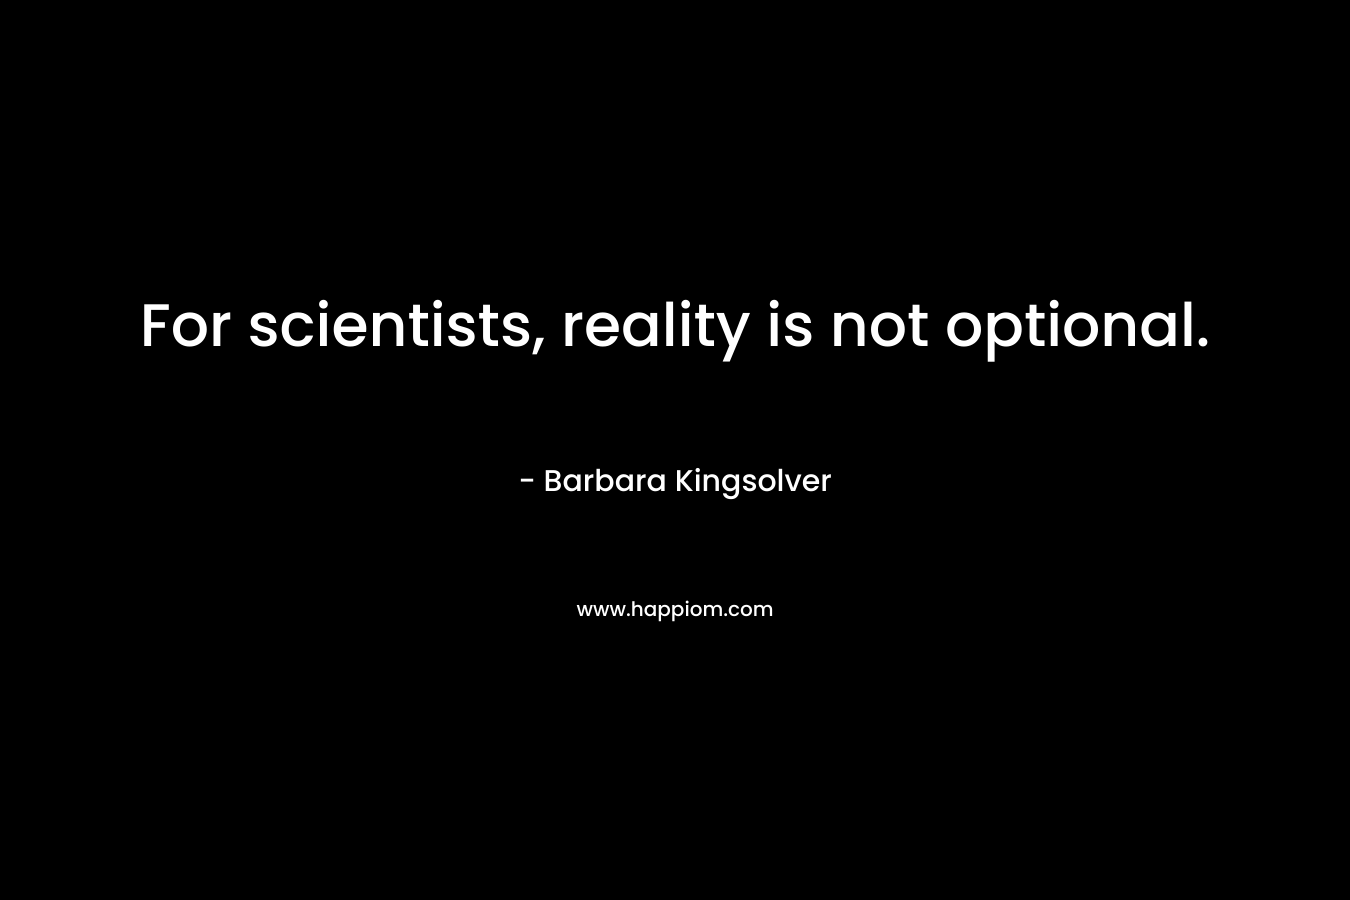 For scientists, reality is not optional.